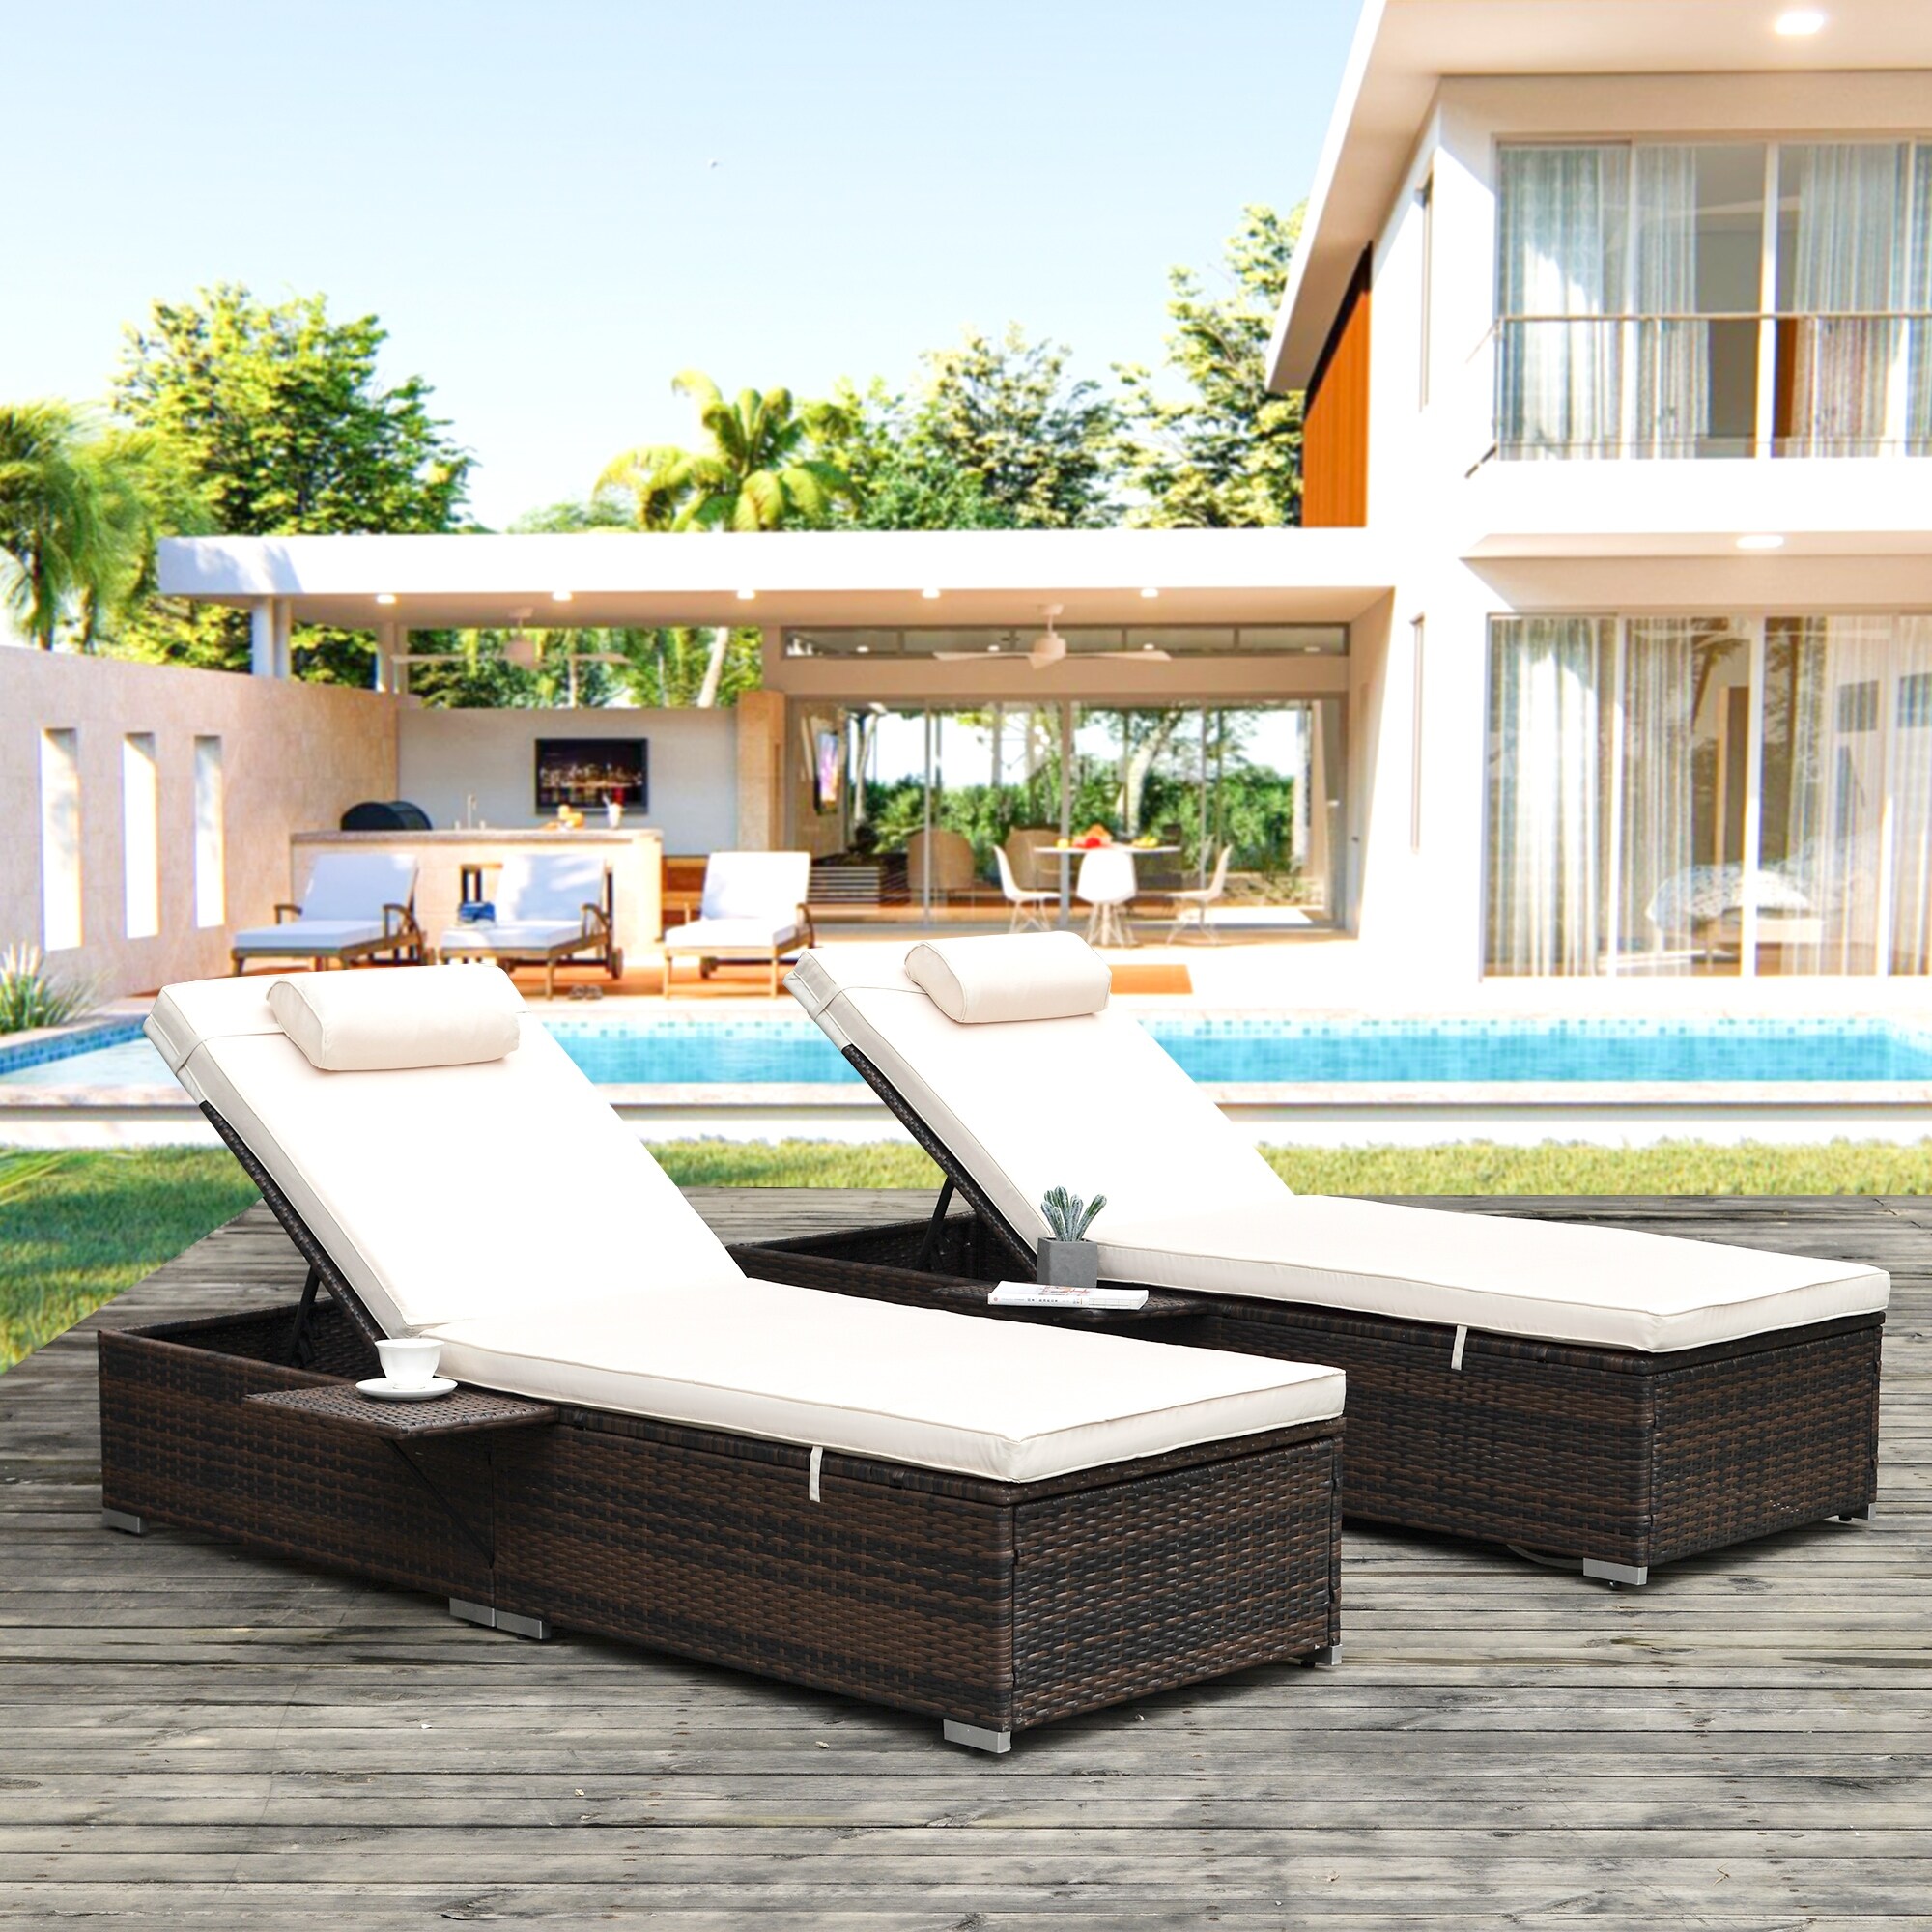 Outdoor Pe Wicker Chaise Lounge - 2 Piece Patio Brown Rattan Reclining Chair Furniture Set